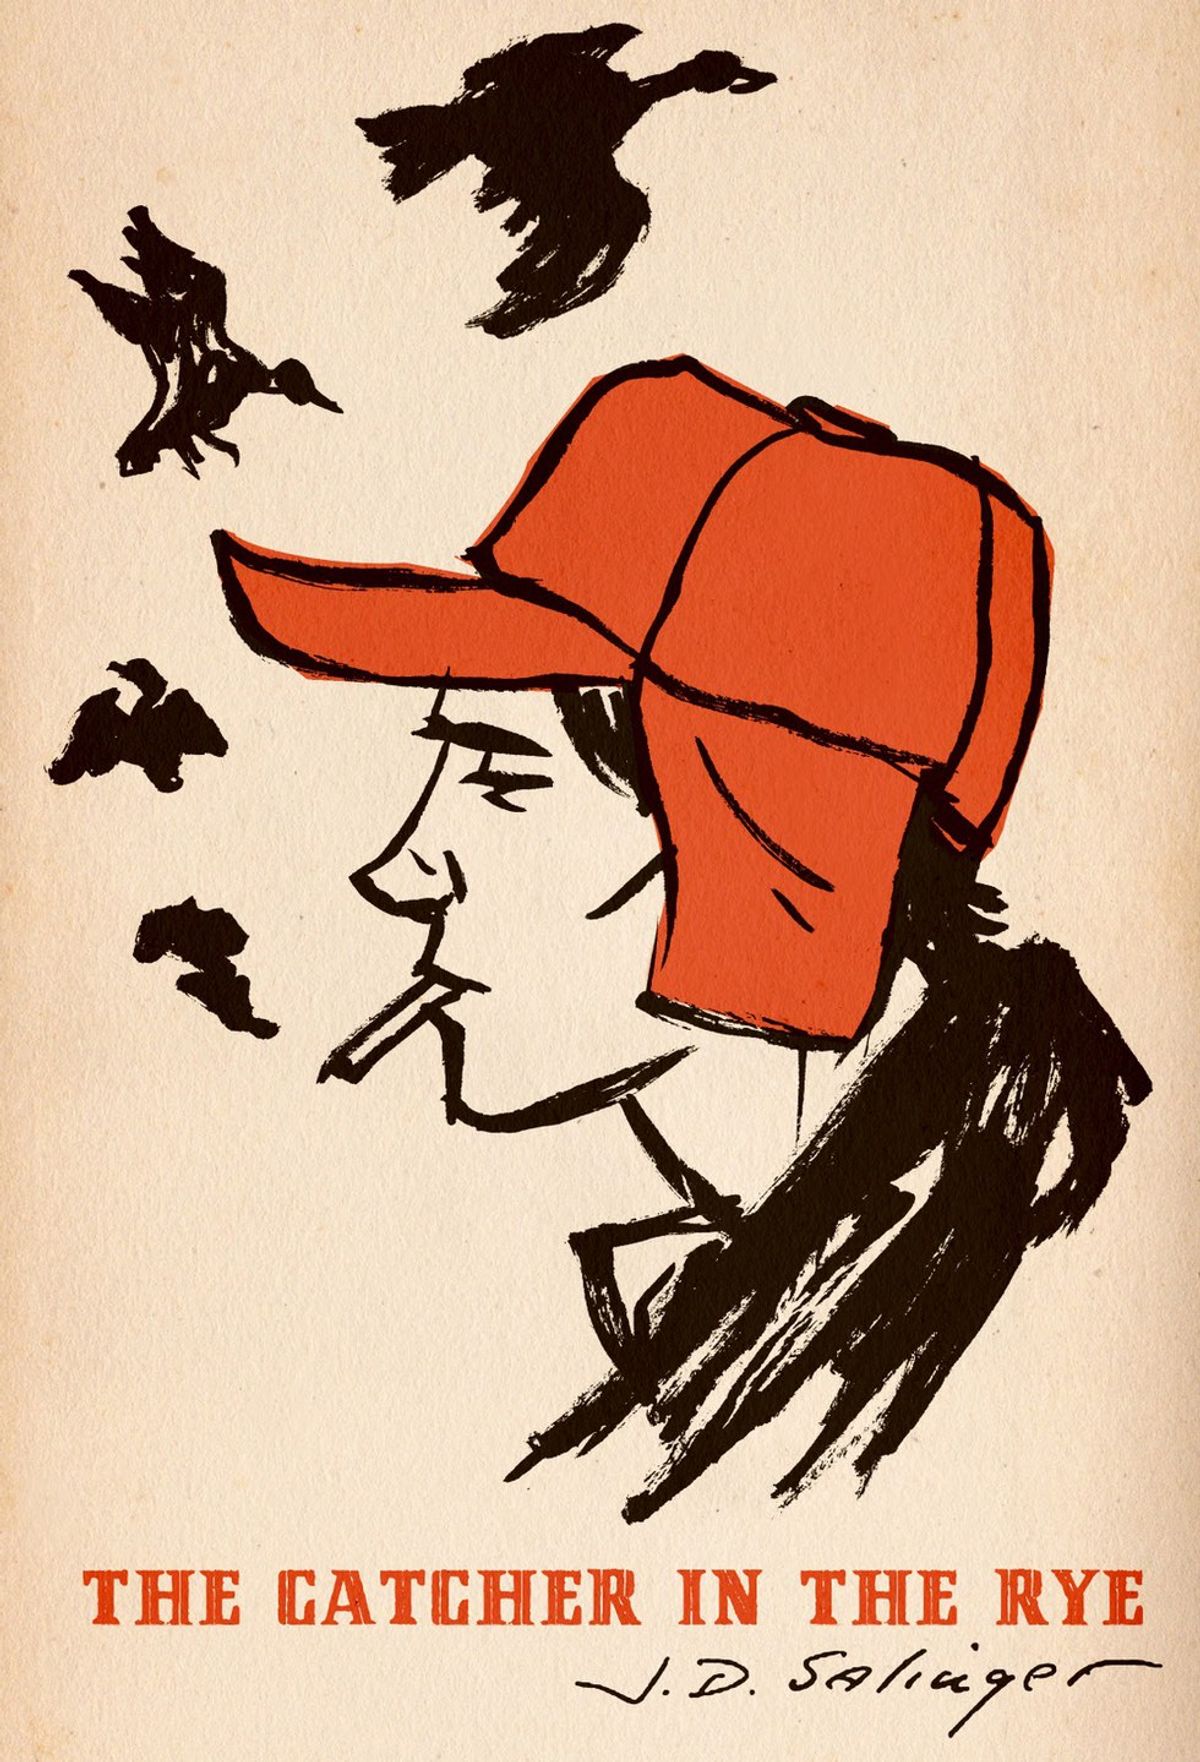 9 Life Truths, As Told By Holden Caulfield